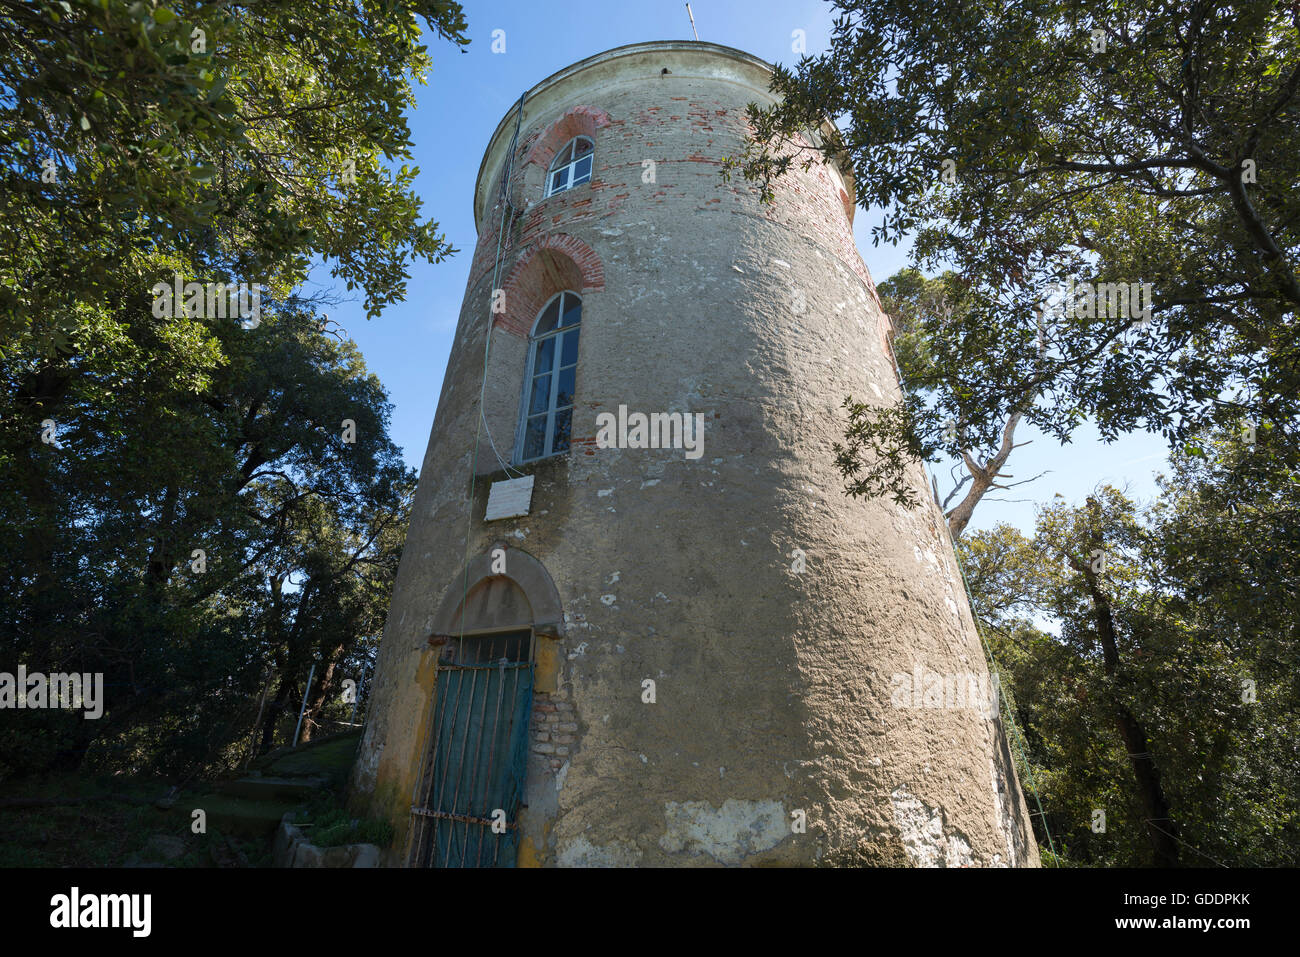 Marconi radio tower. Marconi who invented the radio test the radio signal in this tower in Sestri Levante,Italy. Stock Photo